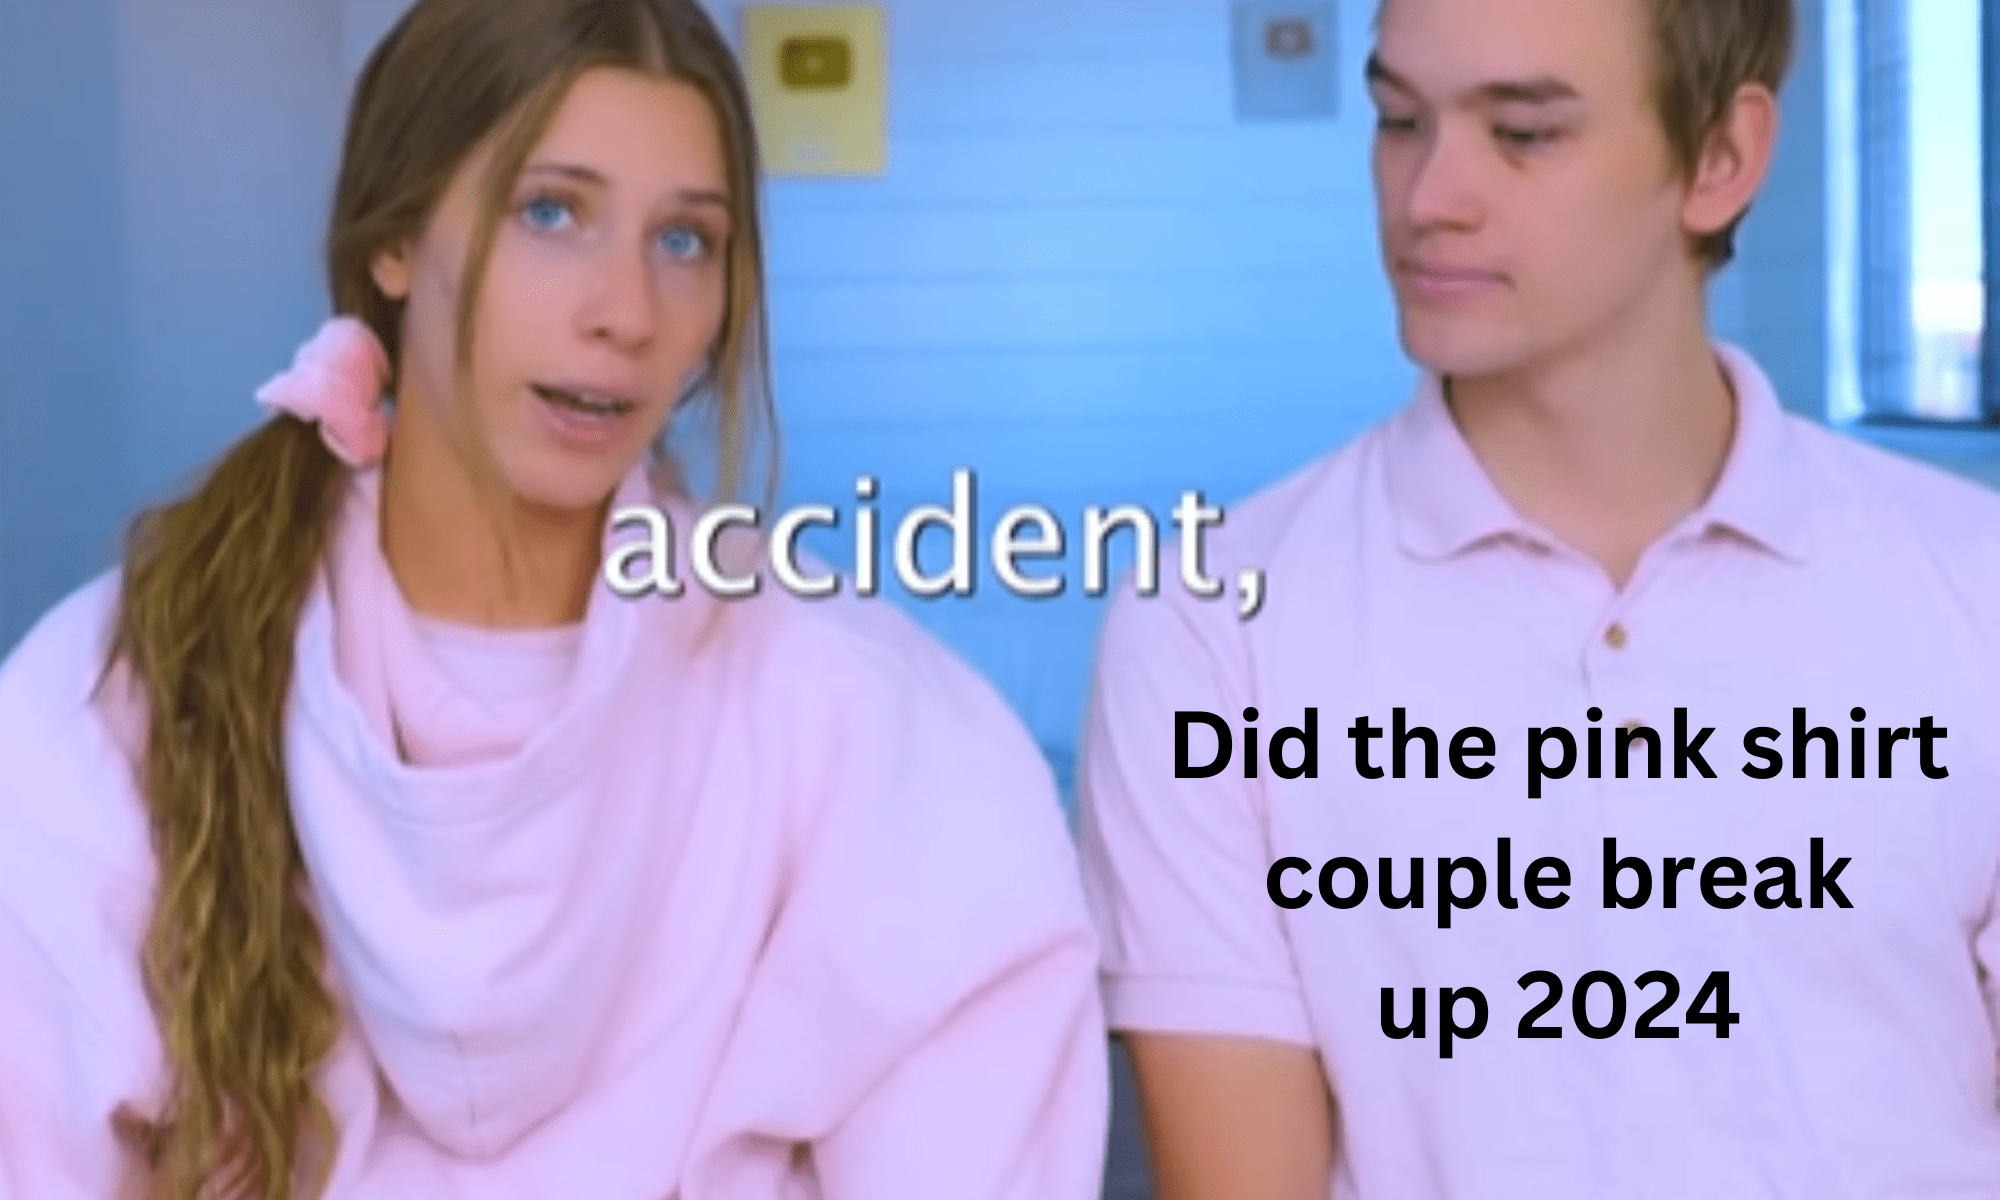 Did the pink shirt couple break up 2024